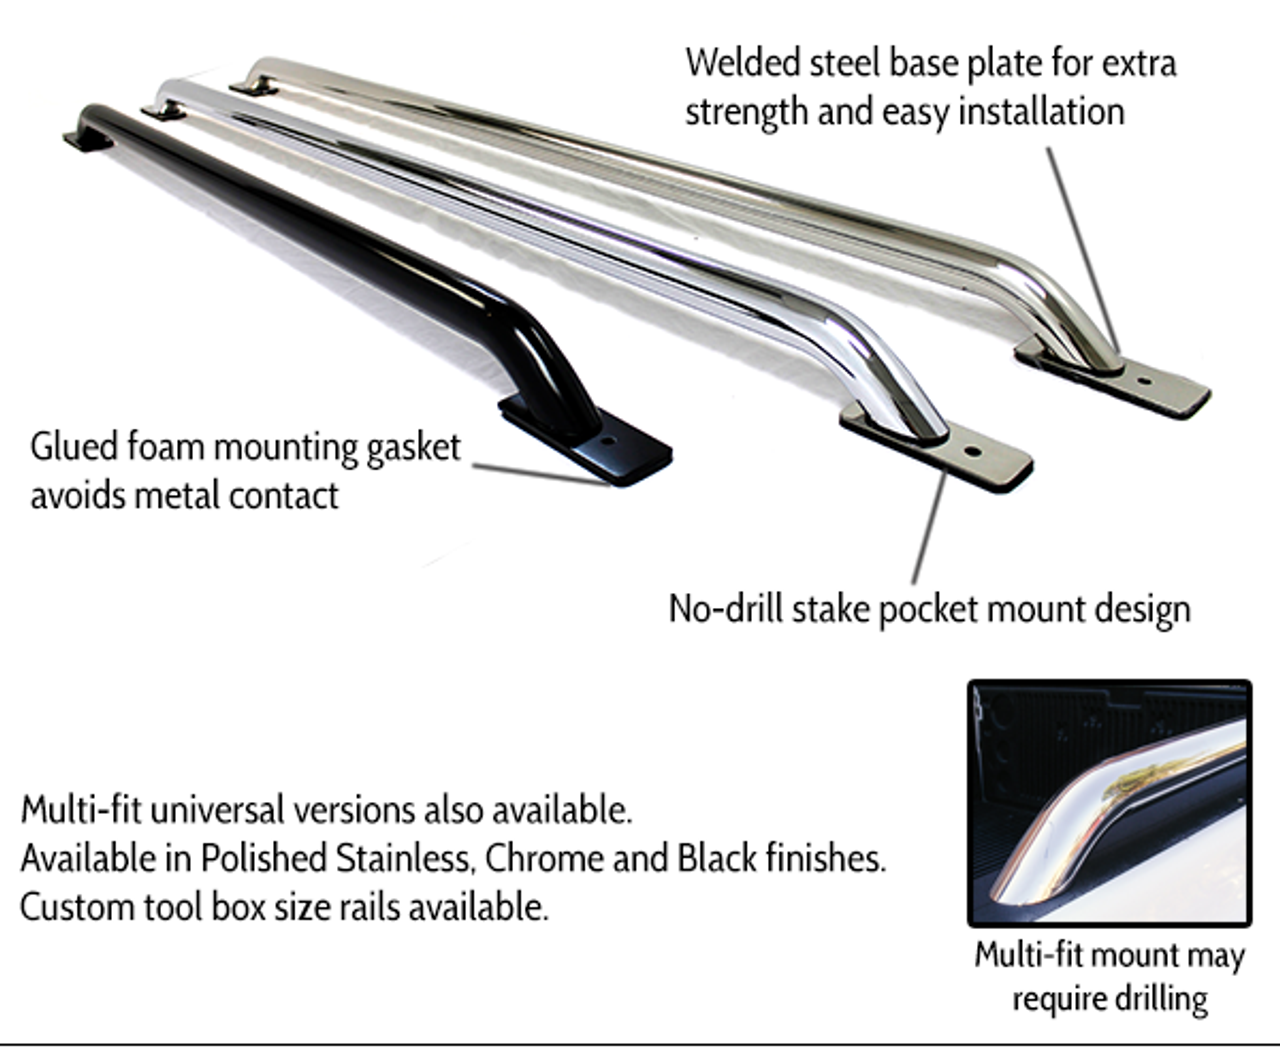 Go Rhino 8048PS Universal Bed Rails - 4 Ft. Long - With base plates - Stainless, Stake Pocket Bed Rails, Polished Stainless Steel, Mounting Kit Included, Fits Ford Chevrolet Toyota Jeep, Dodge, Nissan, Buick GMC